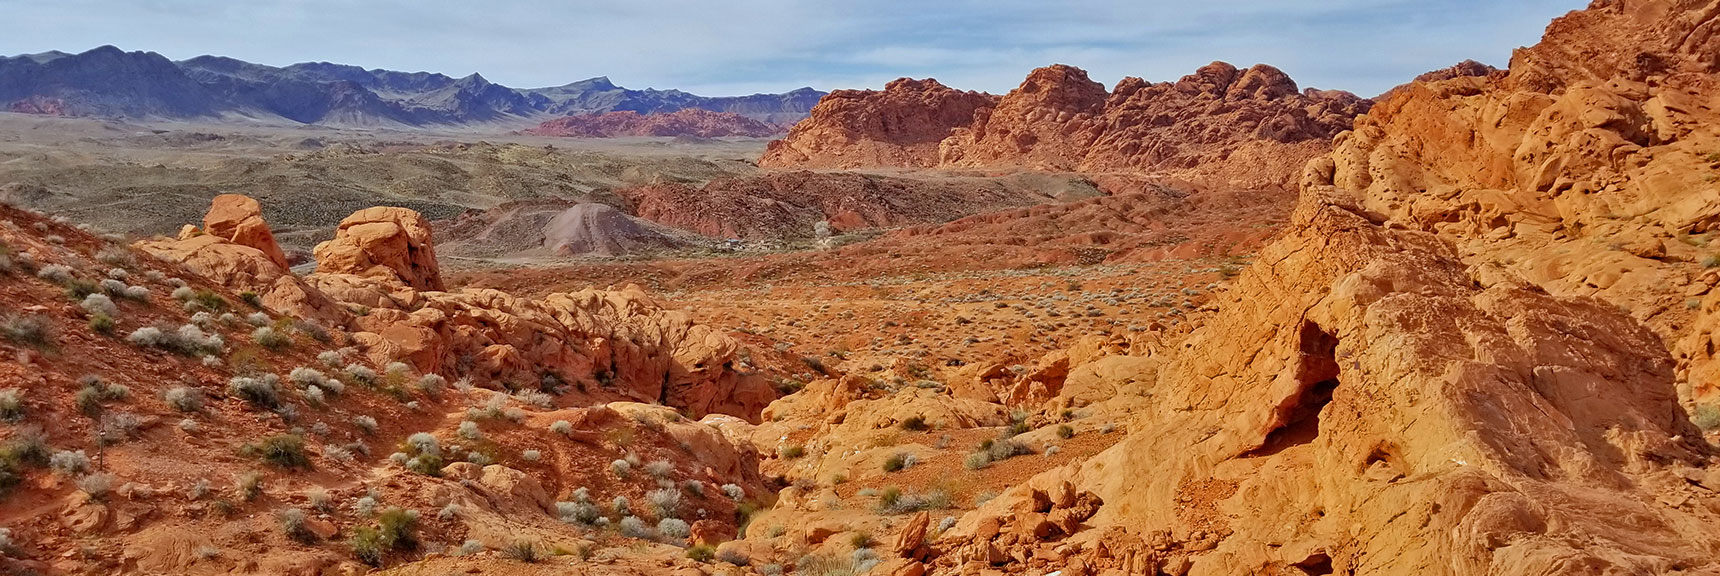 View West of Elephant Rock Loop in Valley of Fire State Park, Nevada